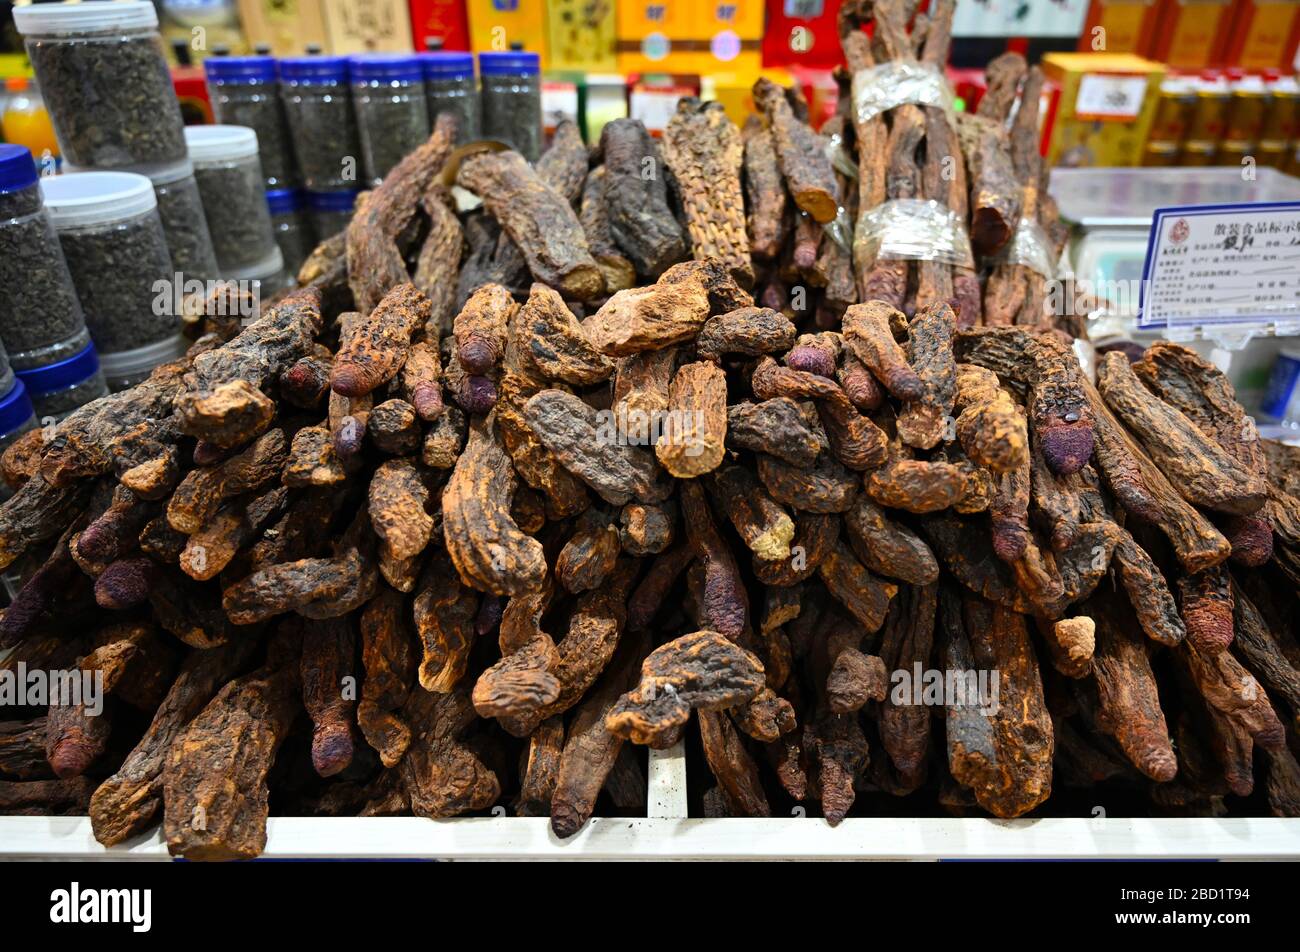 Codonopsis (bellflower) root sold for use in Chinese medicine as a tonic for Qi, blood, Yin and Yang, Dunhuang, China, Asia Stock Photo